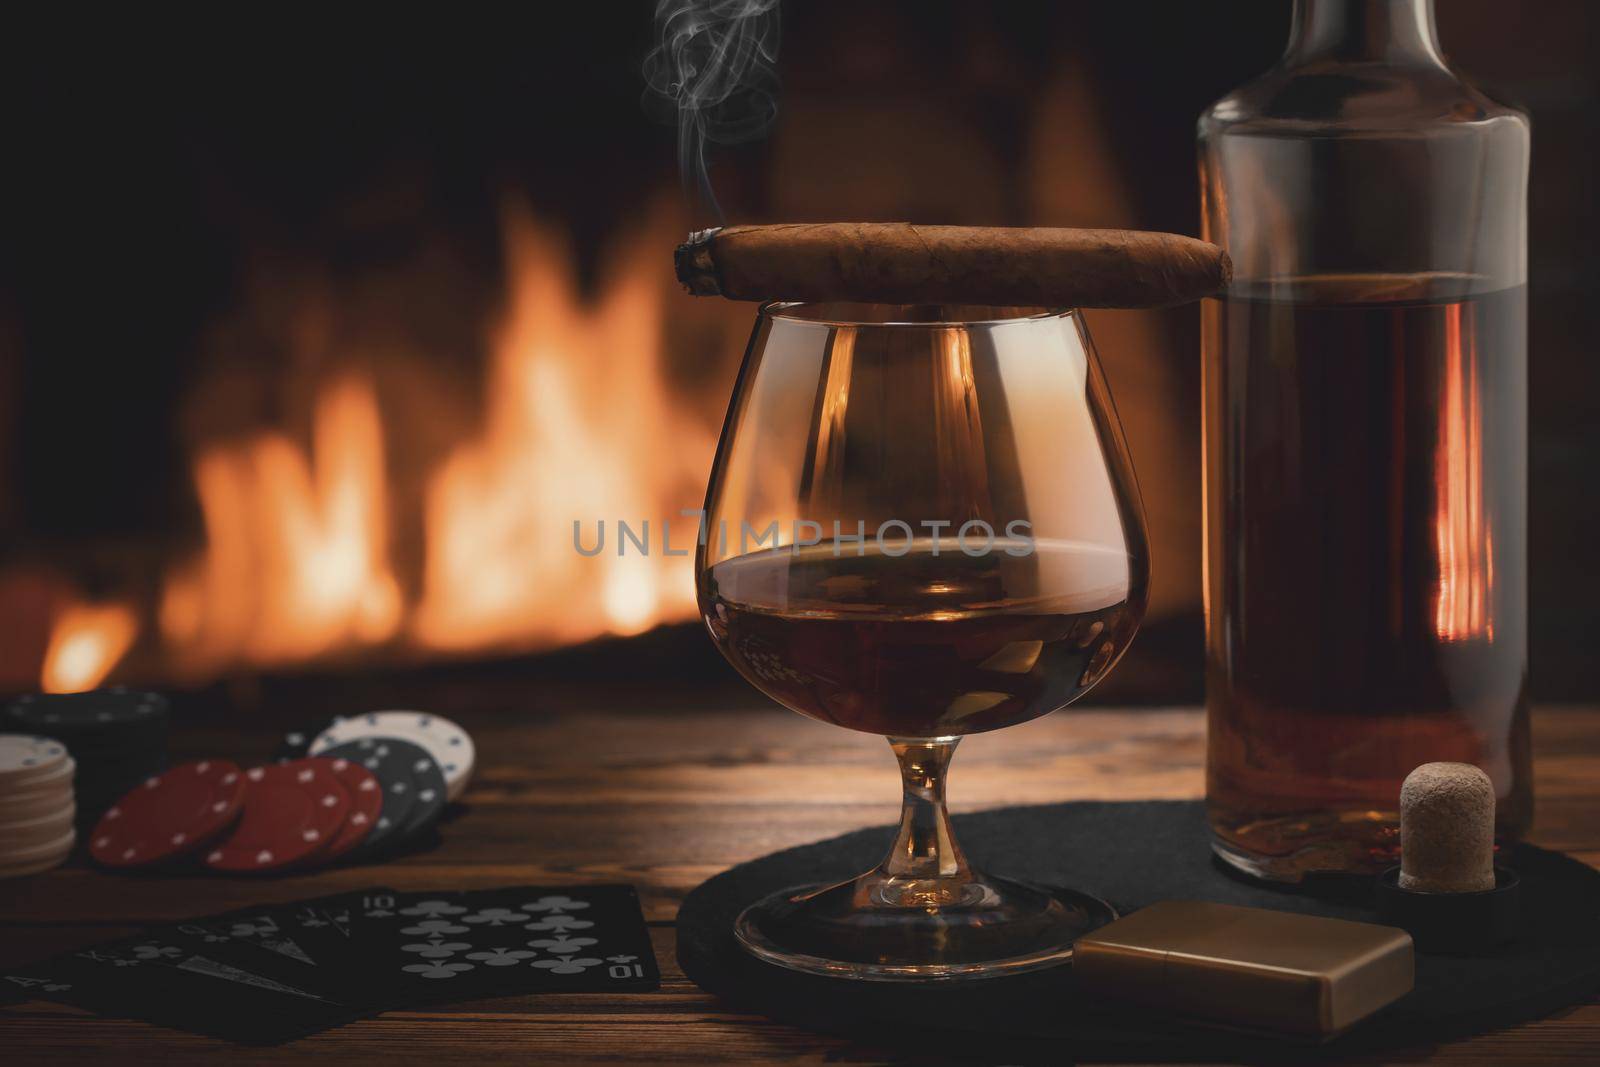 Glass of cognac, cigar, bottle, cards game and chips on the table near the burning fireplace. Rest, pleasure, good luck and dolce vita concept by galsand